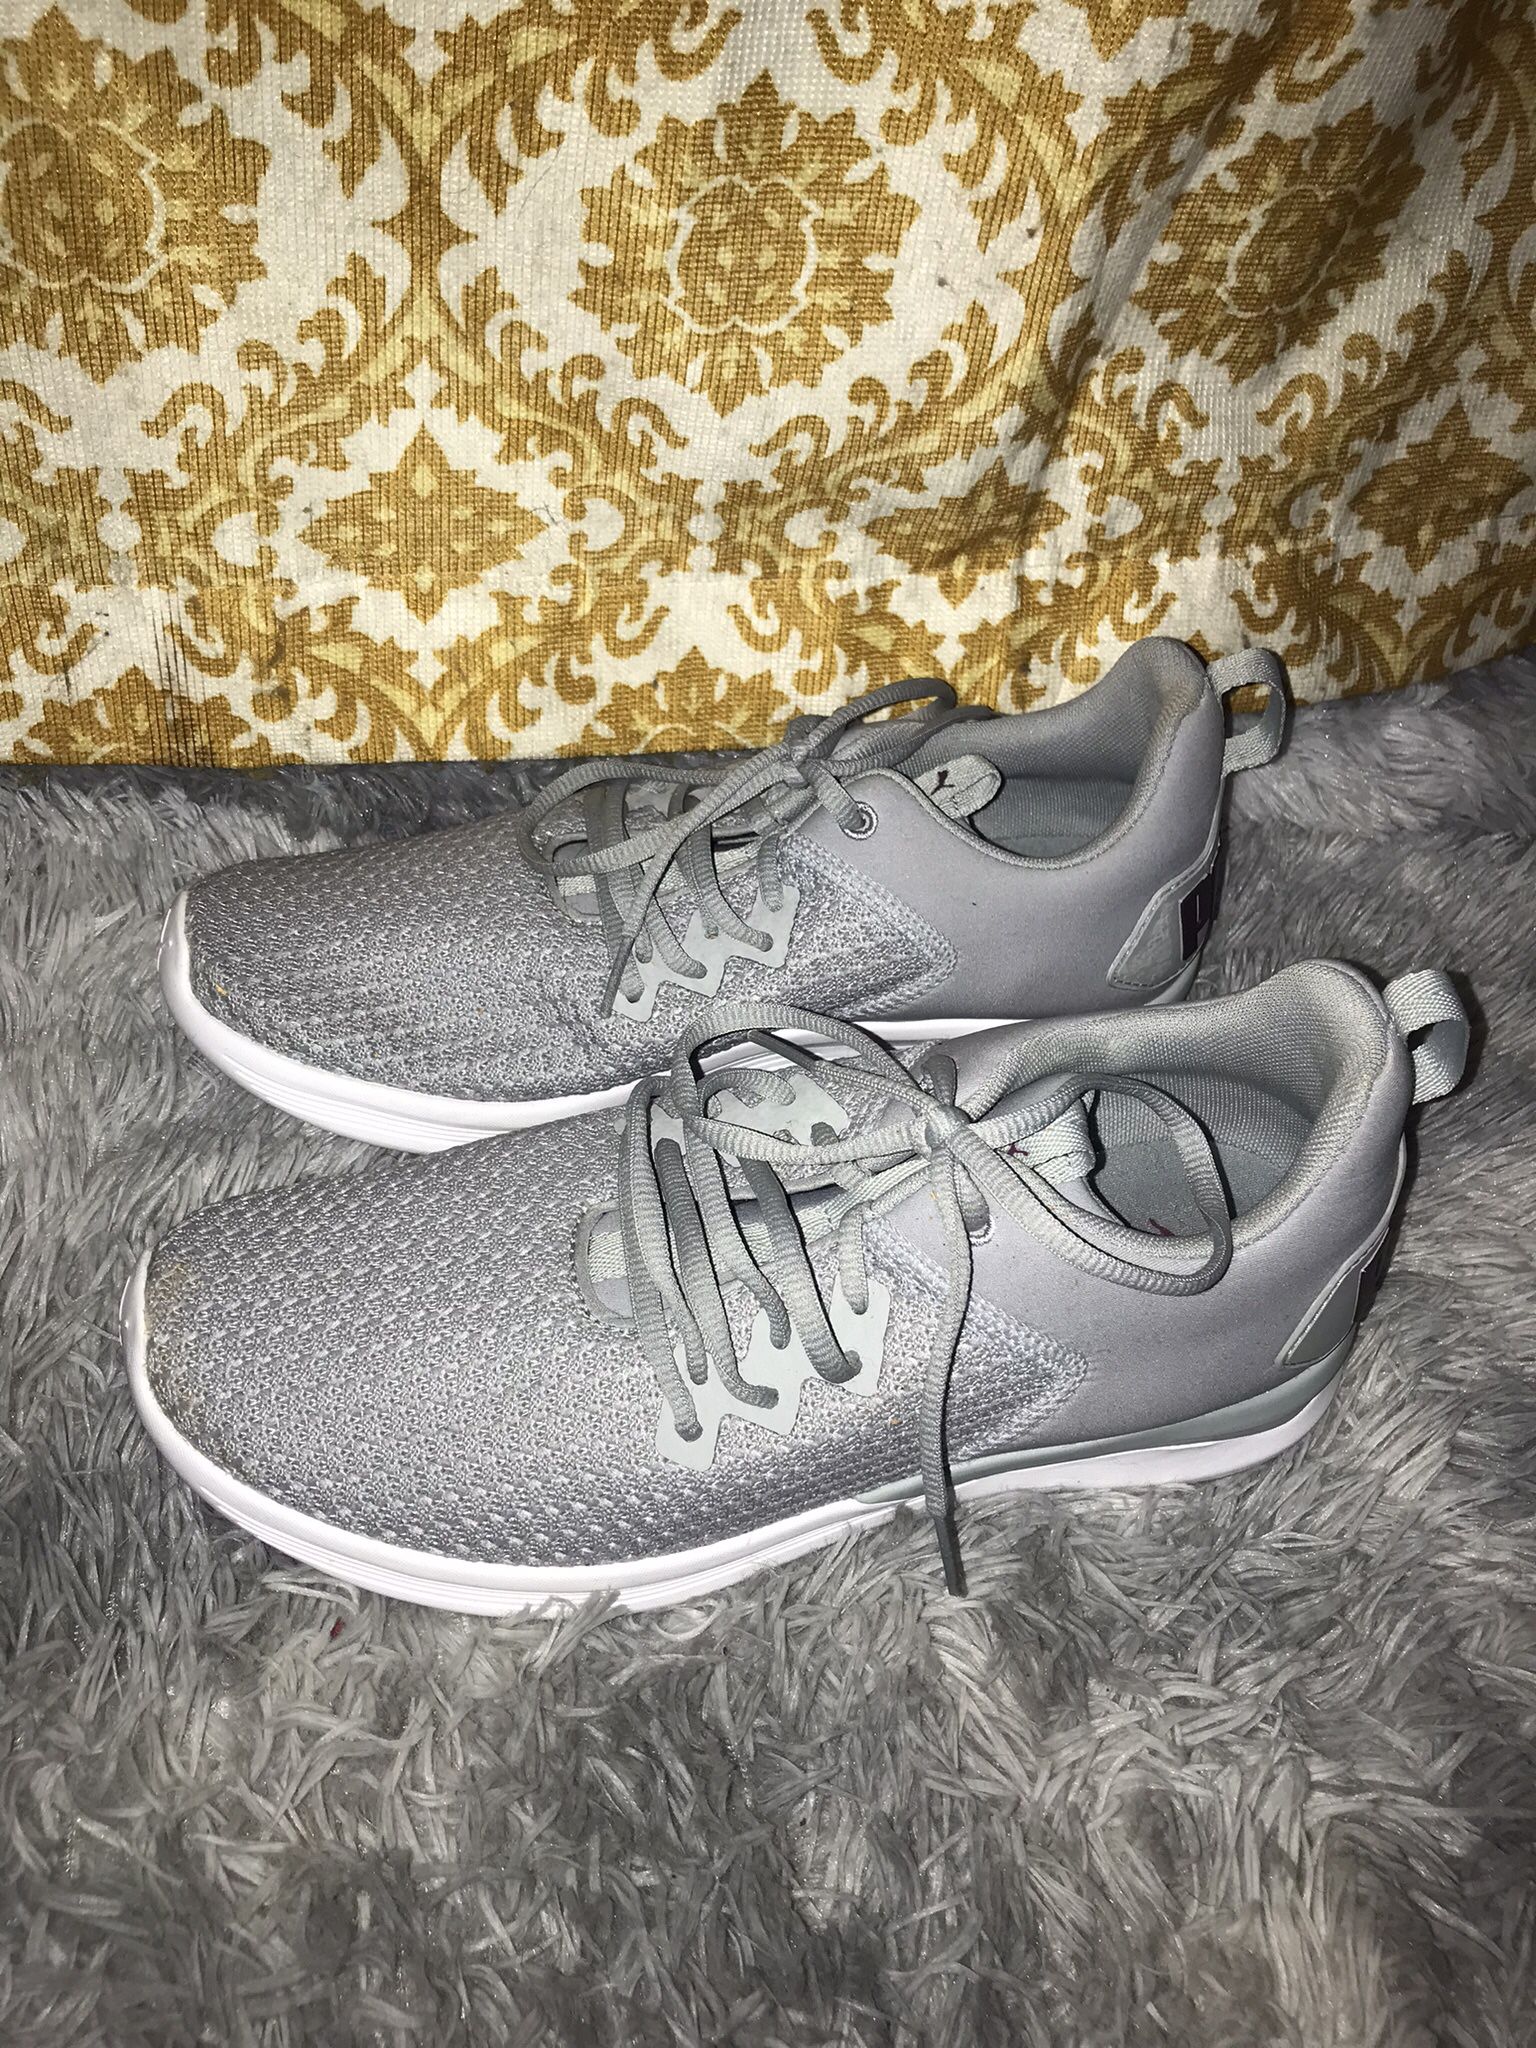 Like New! Womens Size 10!!! Grey Pumas Athletic Shoes Like New!!